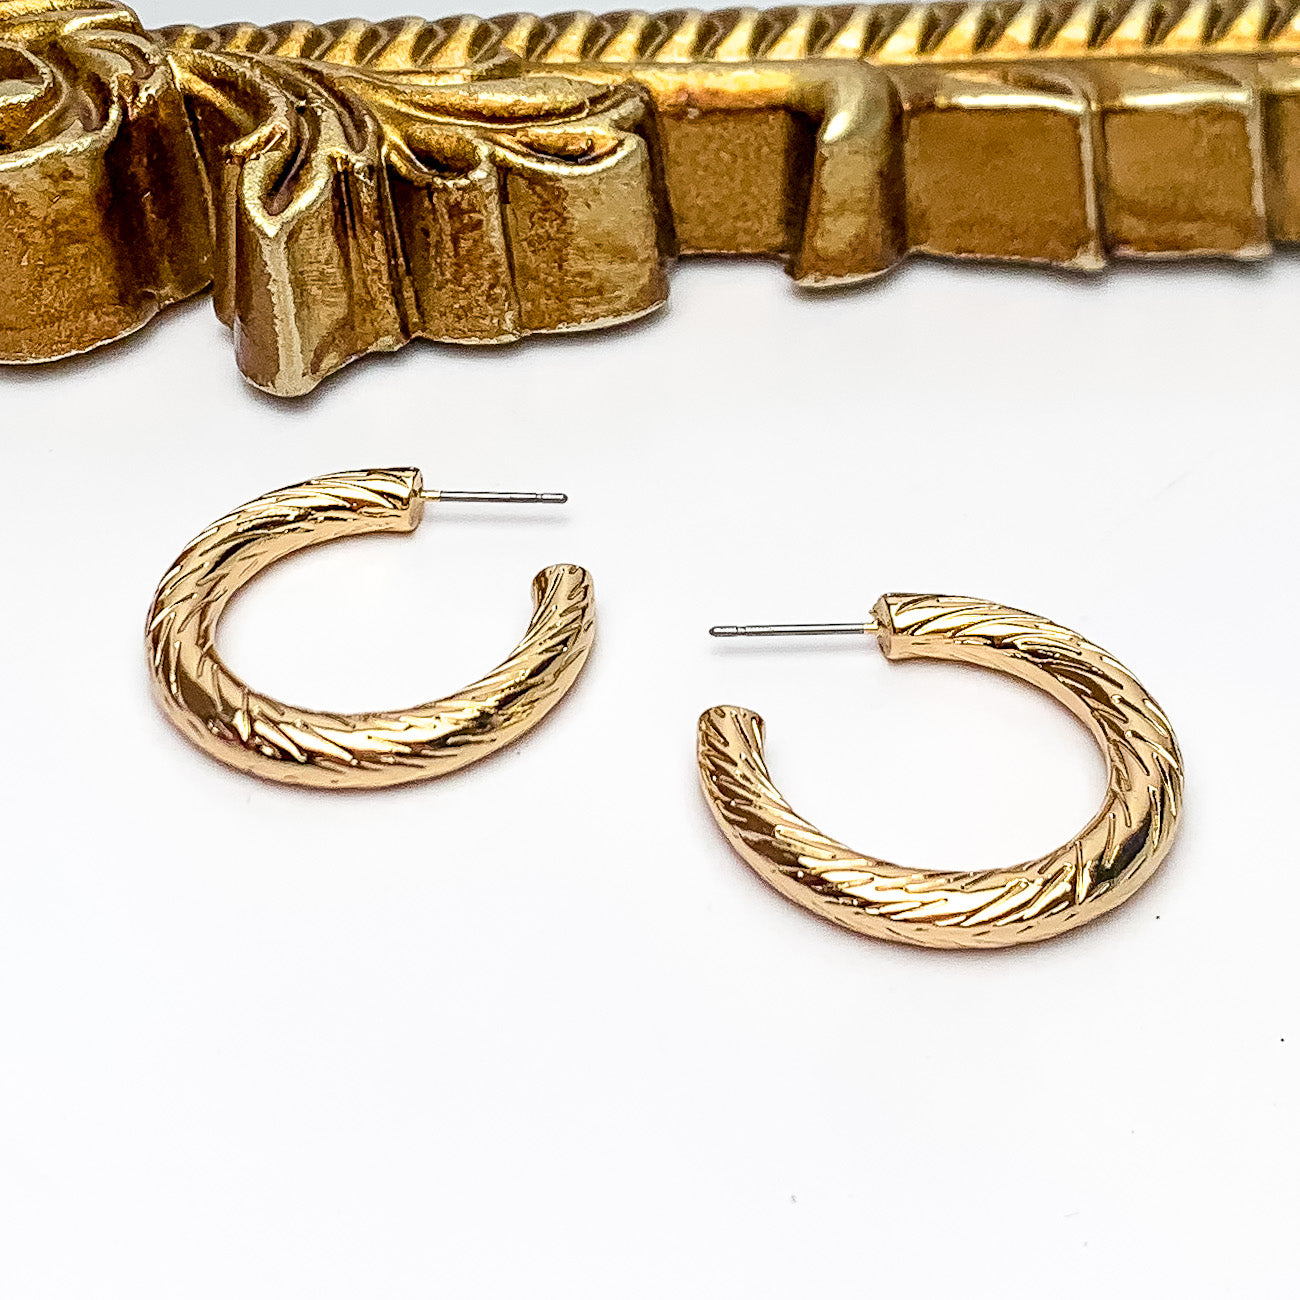 Gold Tone Small Twisted Hoop Earrings. Pictured on a white background with a gold frame above the earrings.